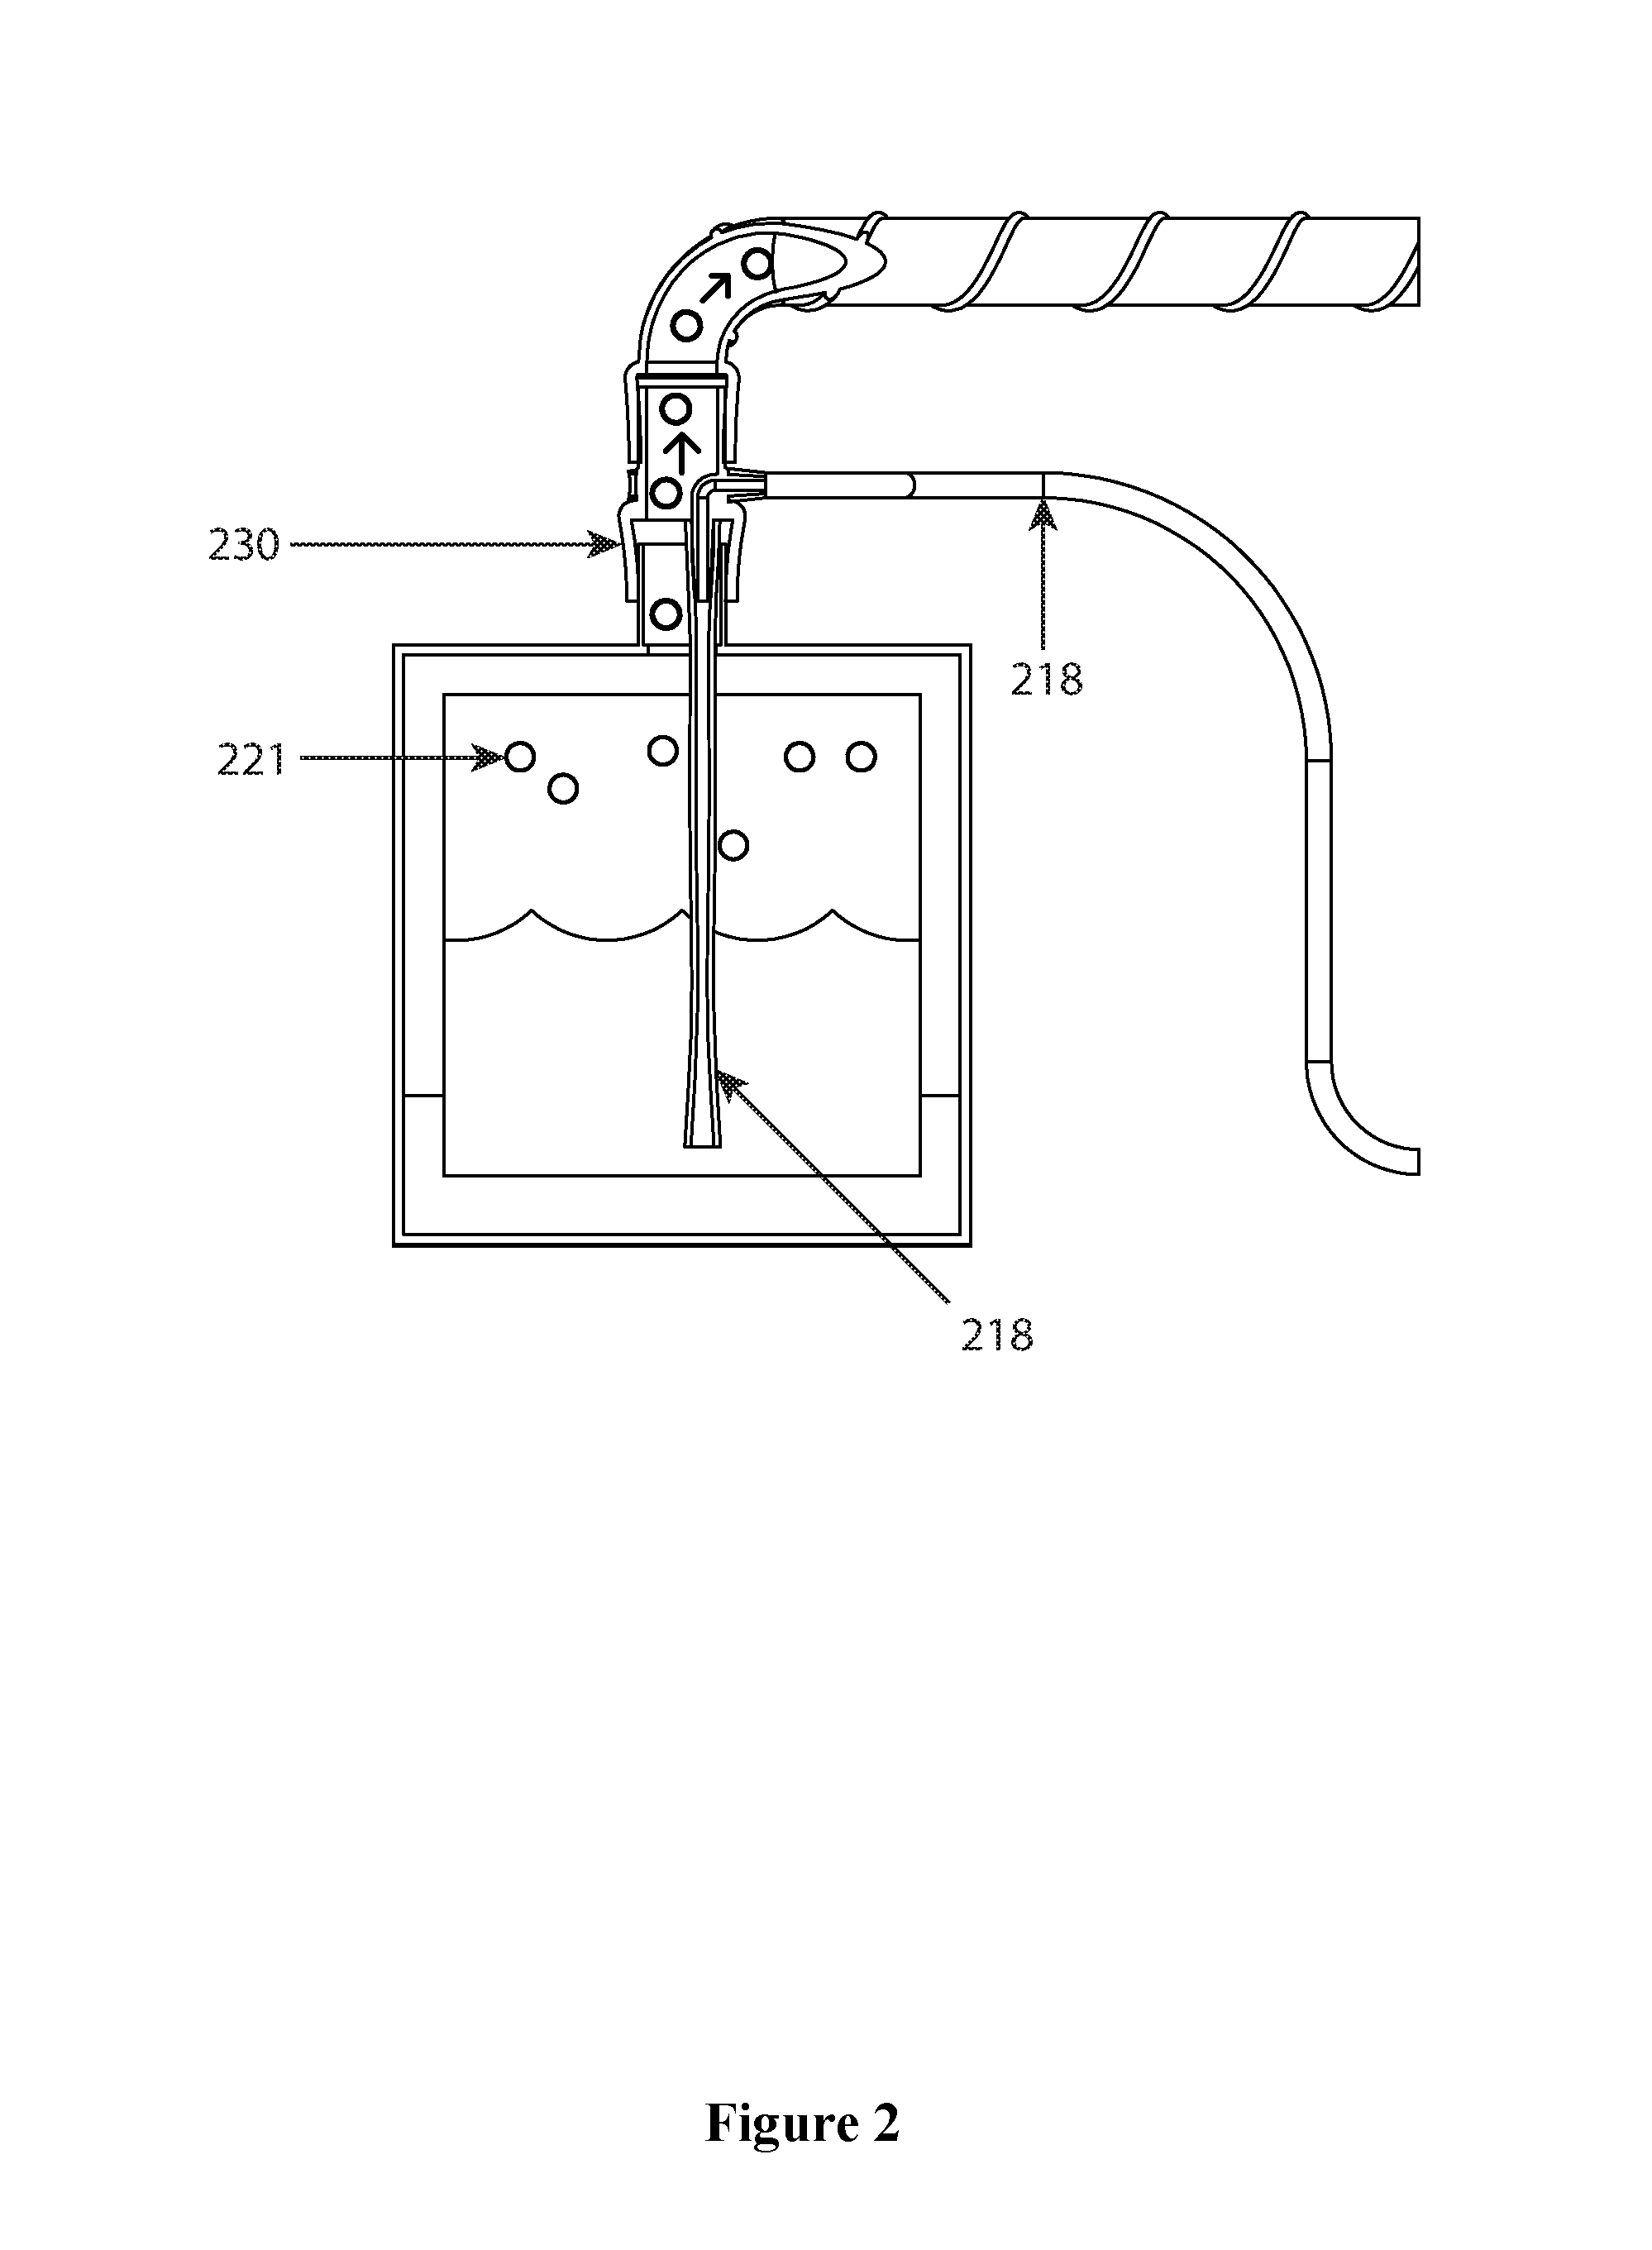 Systems, methods, and devices for ozone sanitization of continuous positive airway pressure devices